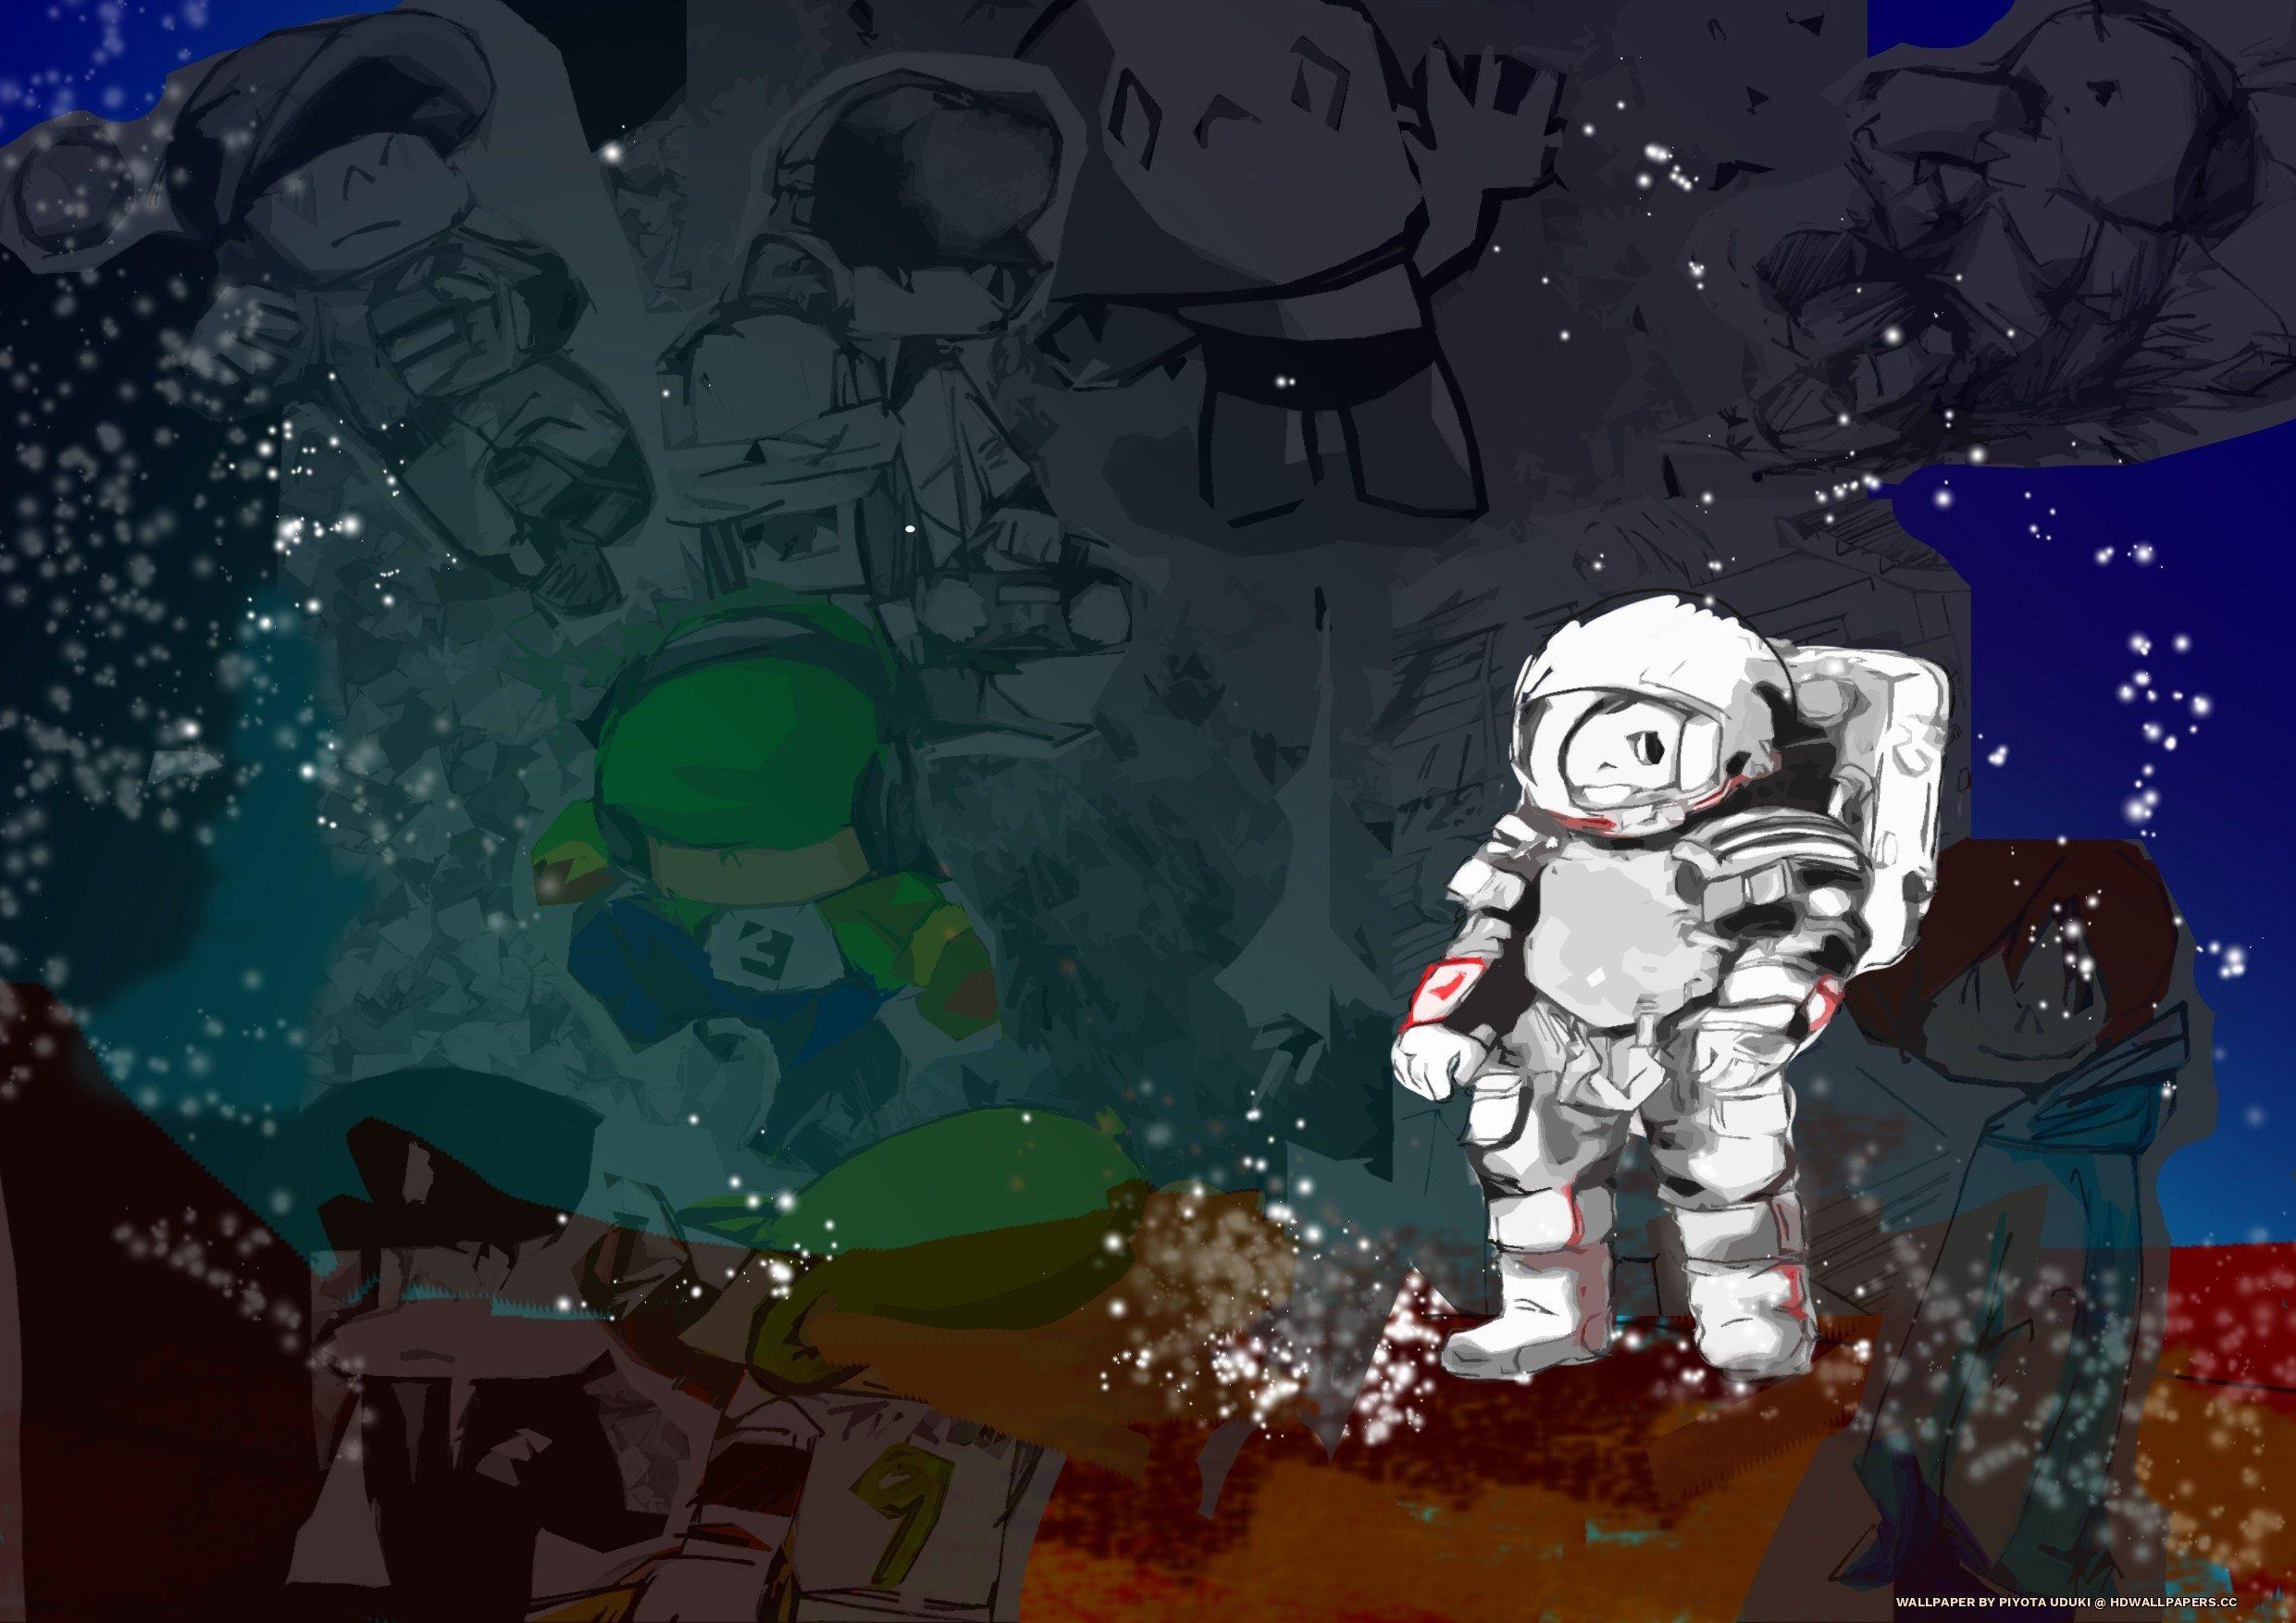 Space Boy Wallpapers - Top Free Space Boy Backgrounds - WallpaperAccess